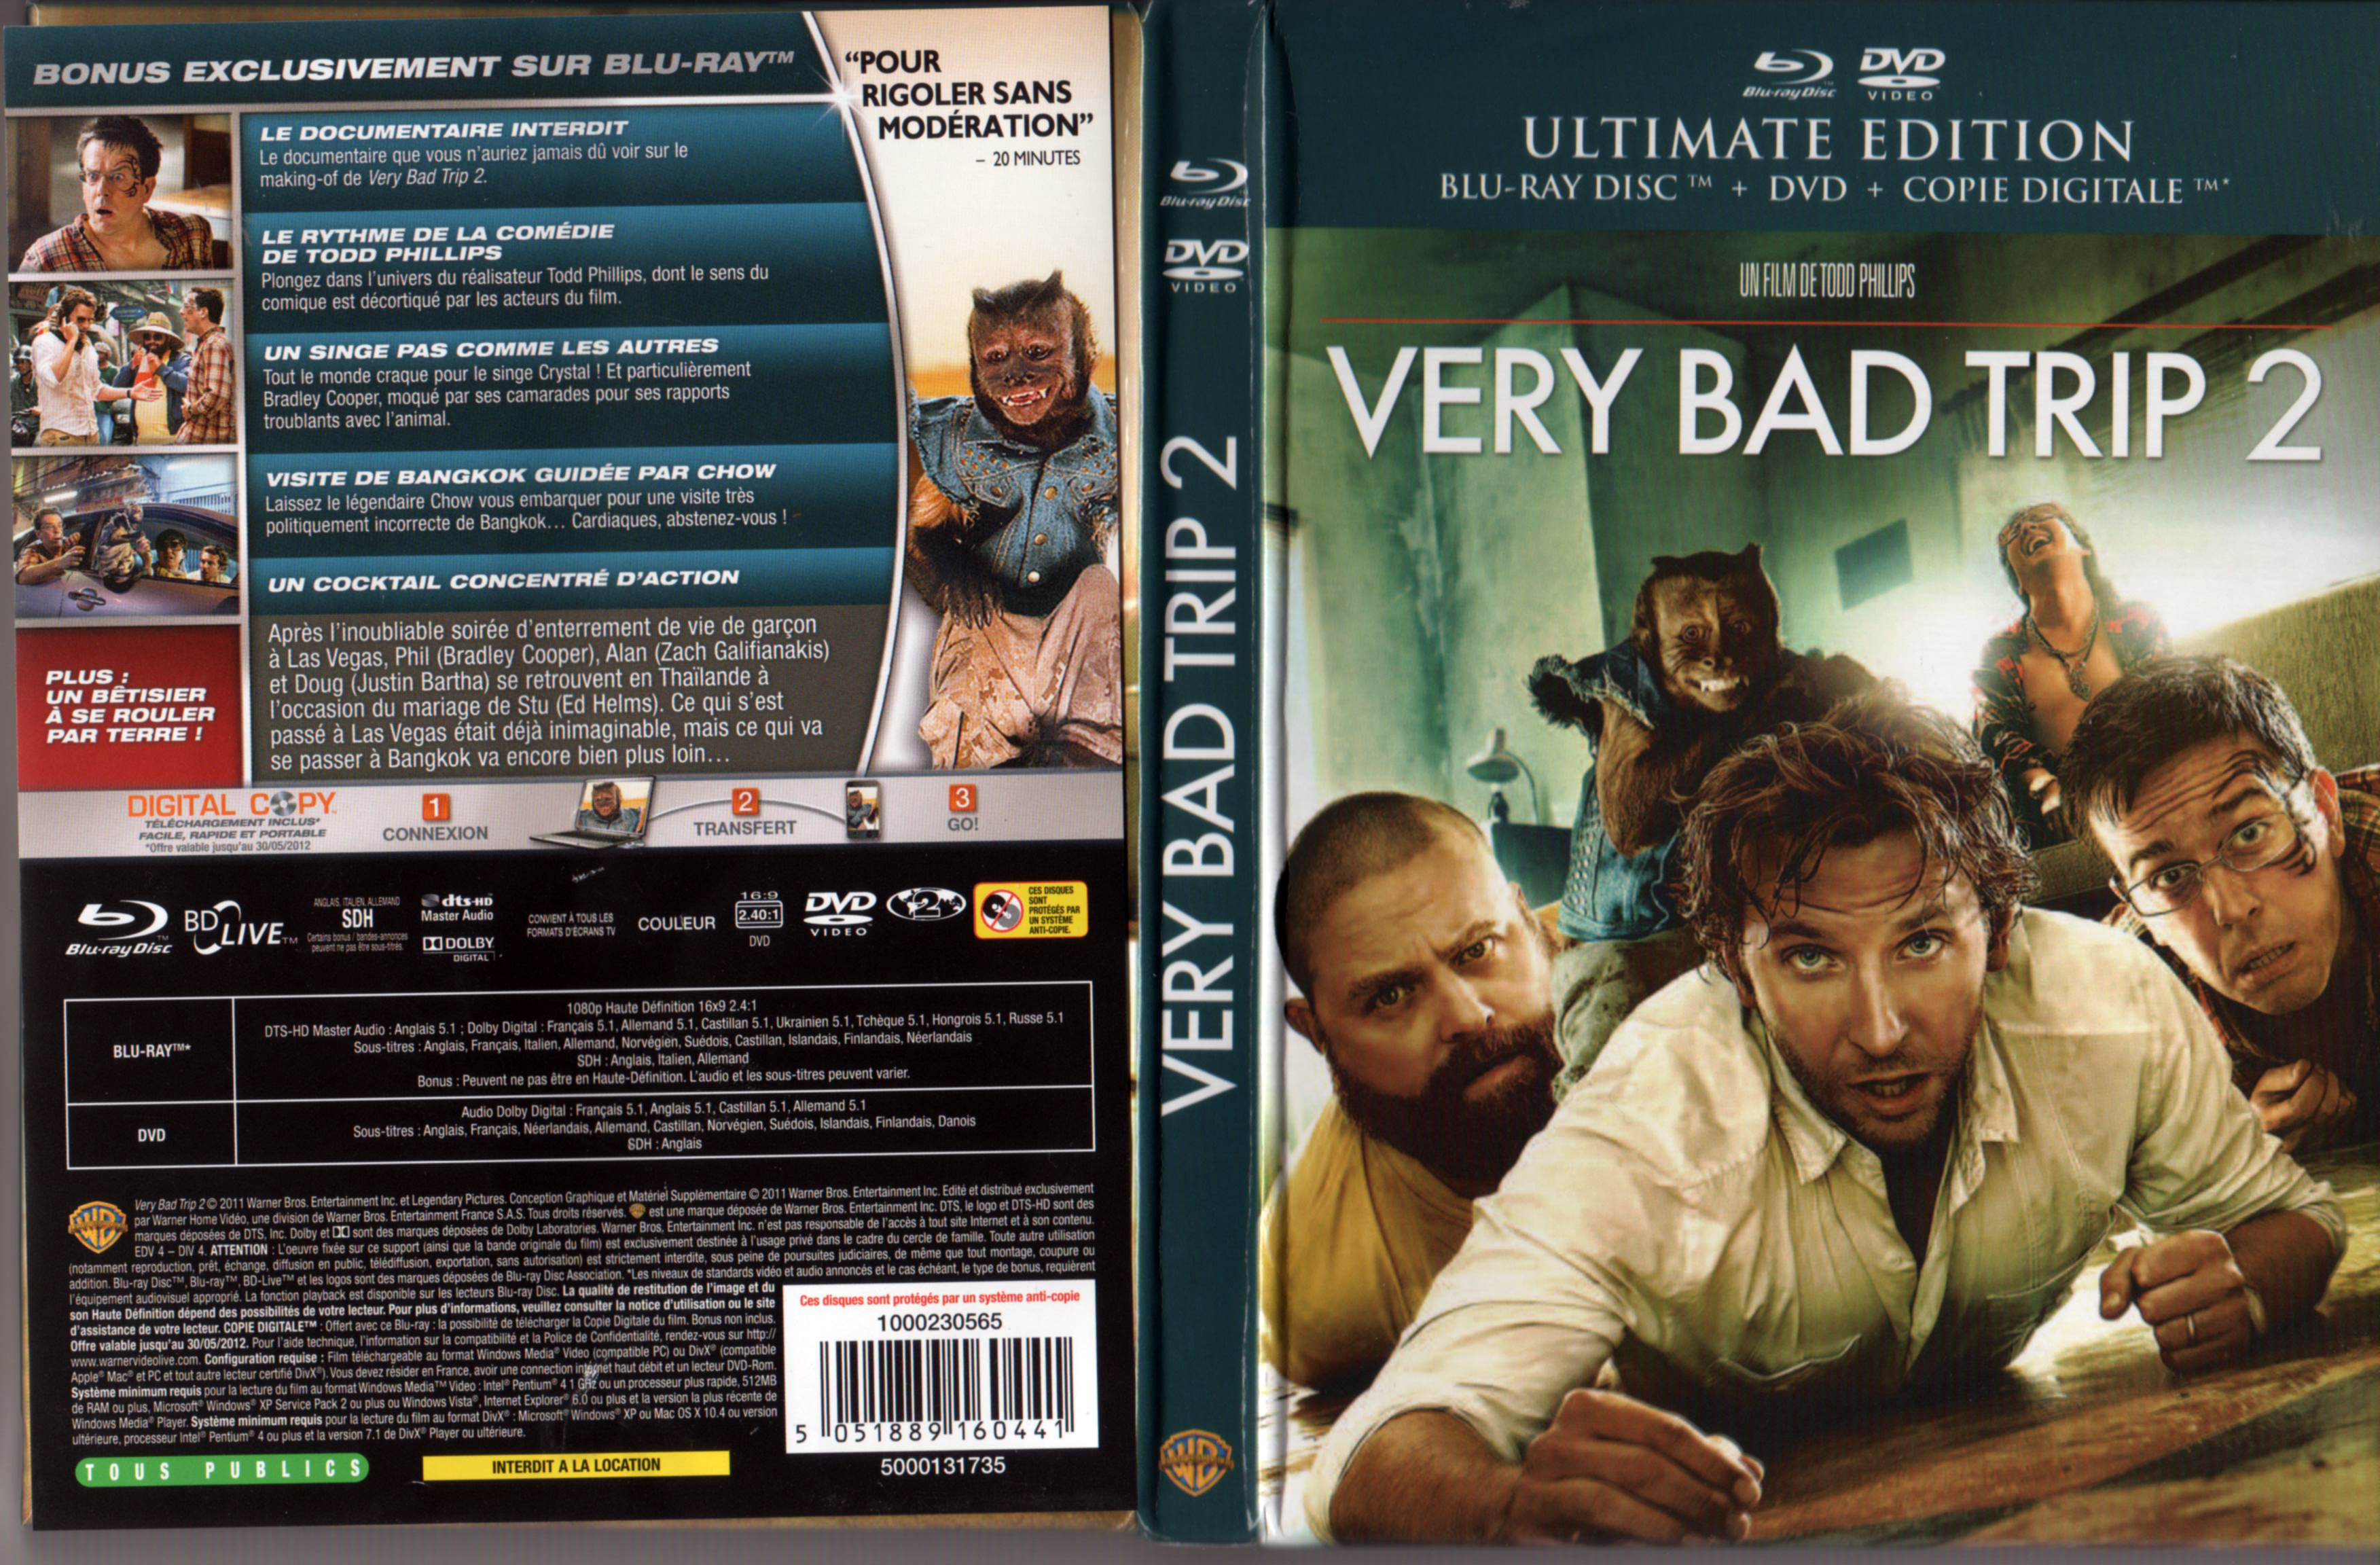 Jaquette DVD Very Bad Trip 2 (BLU-RAY)